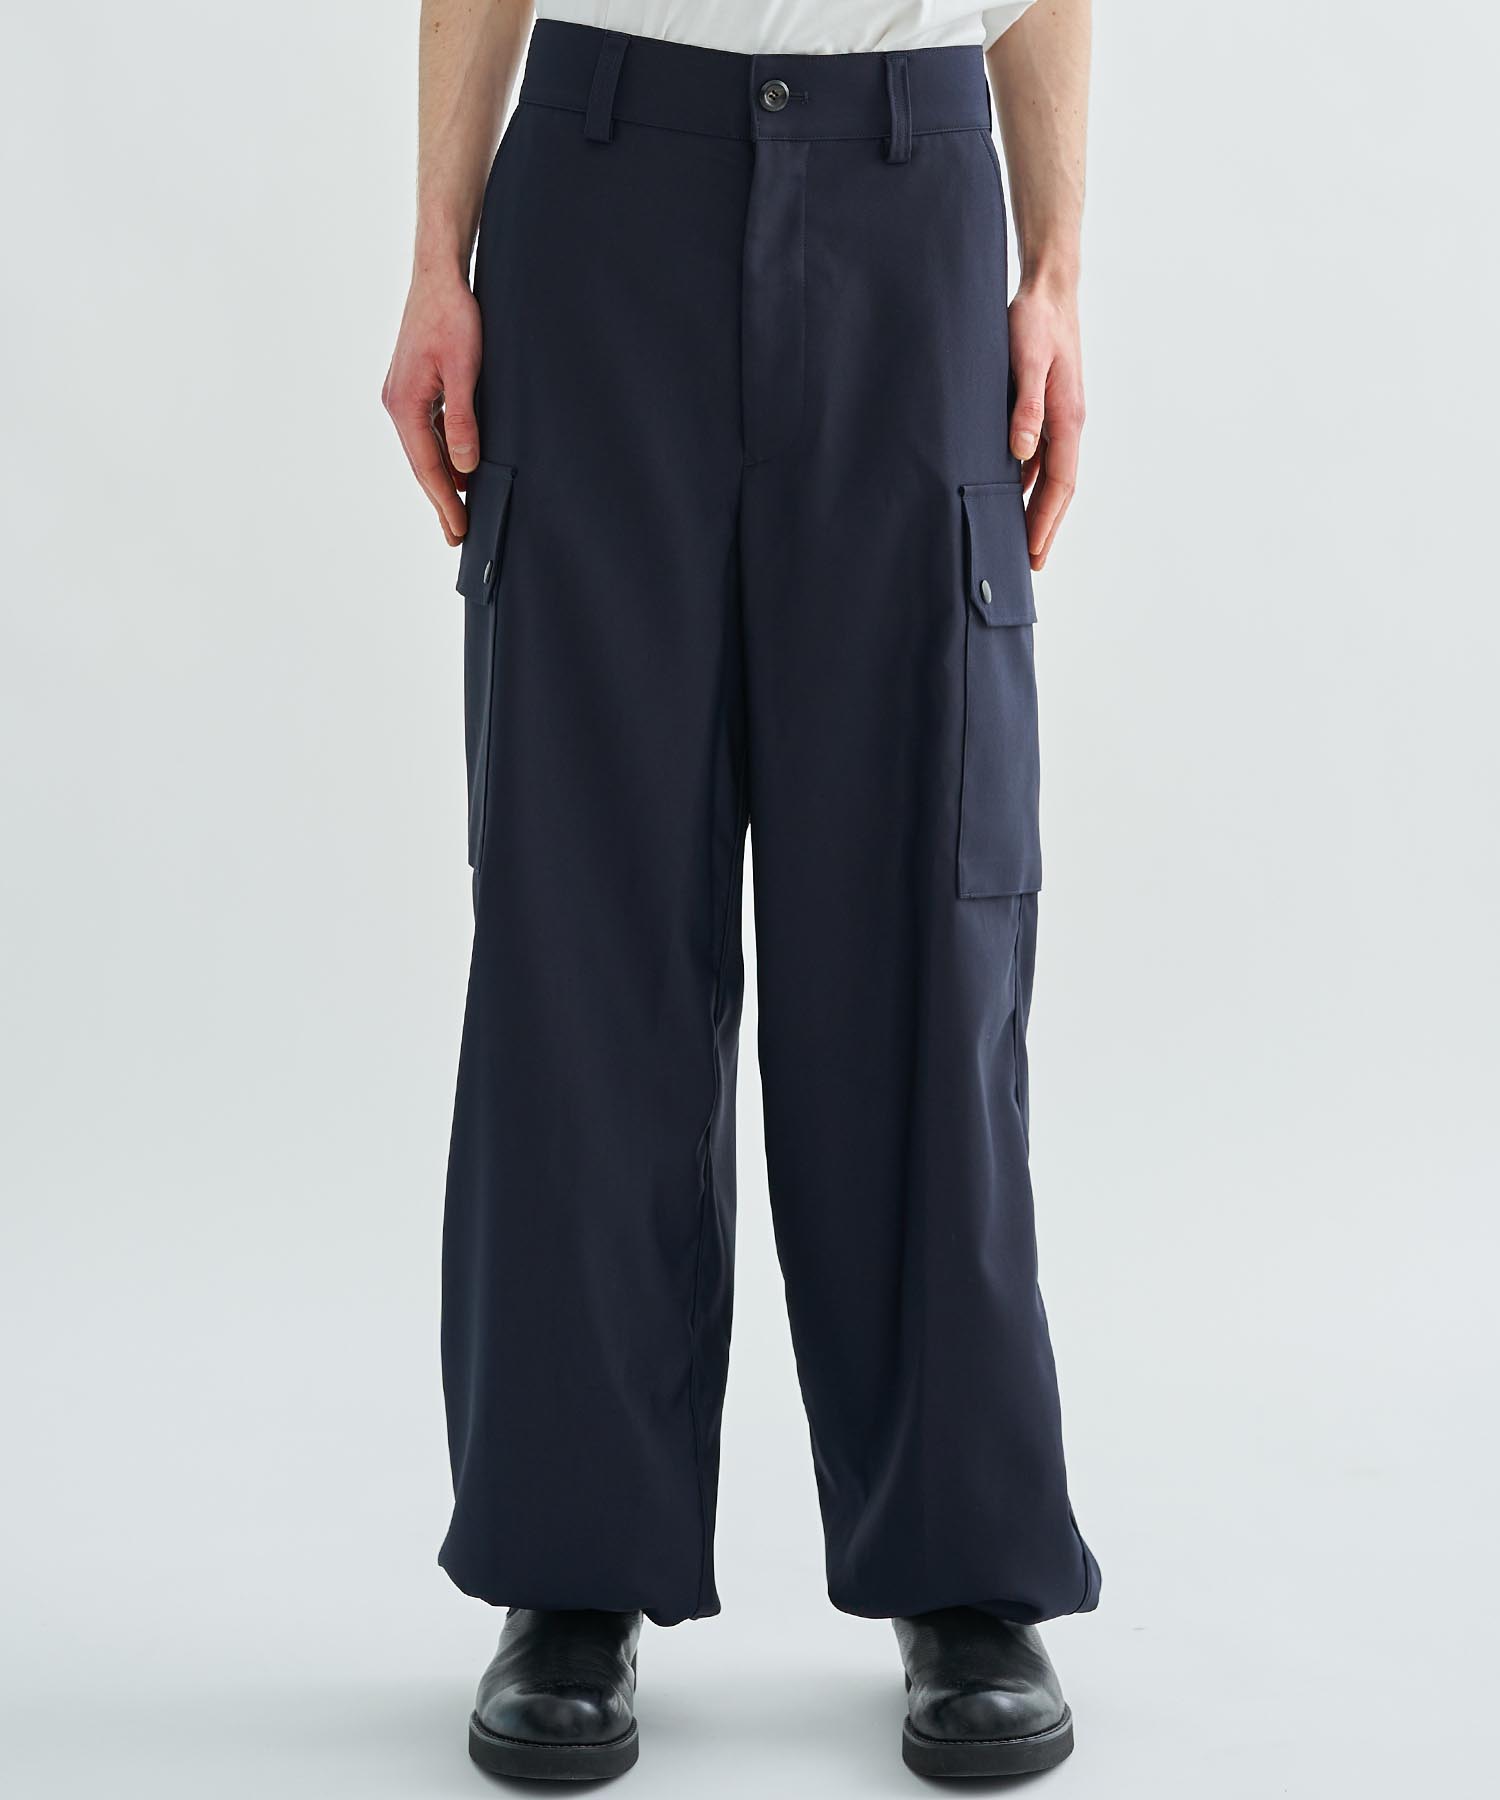 RERACS FRENCH ARMY F2 CARGO PANTS NAVY: THE RERACS: MENS